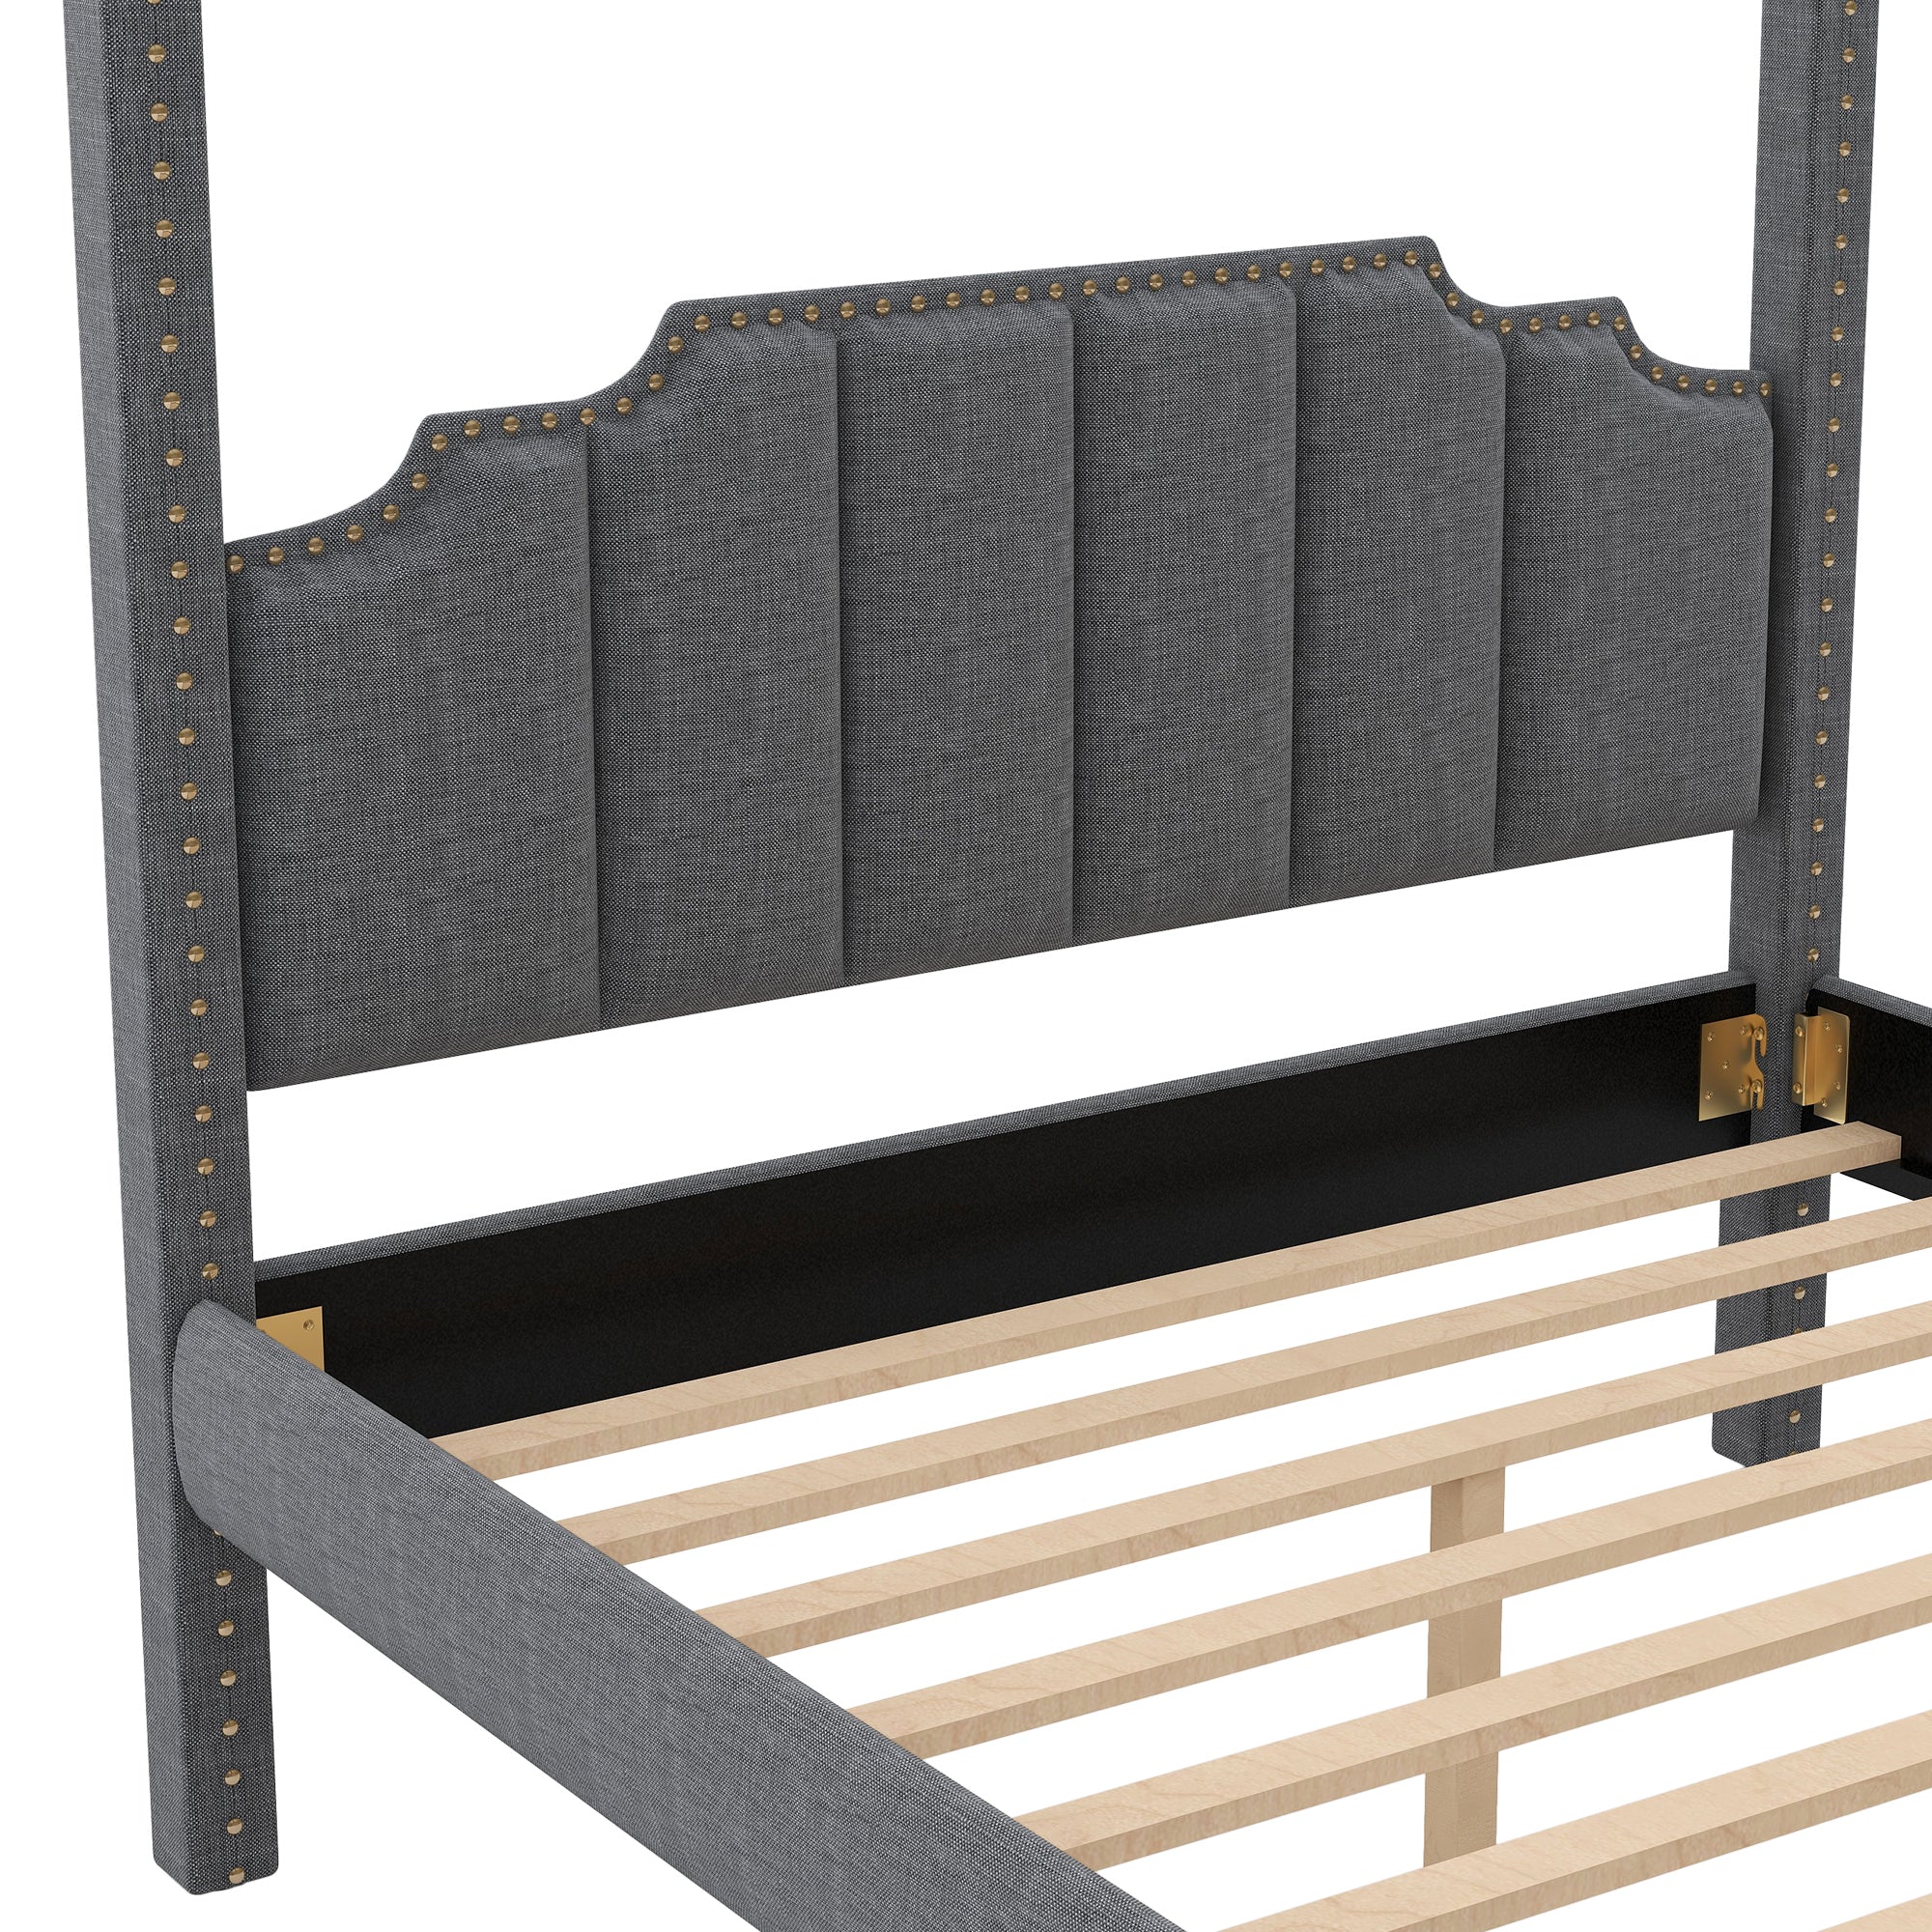 Queen Size Upholstery Canopy Platform Bed with Headboard,Support Legs - Gray